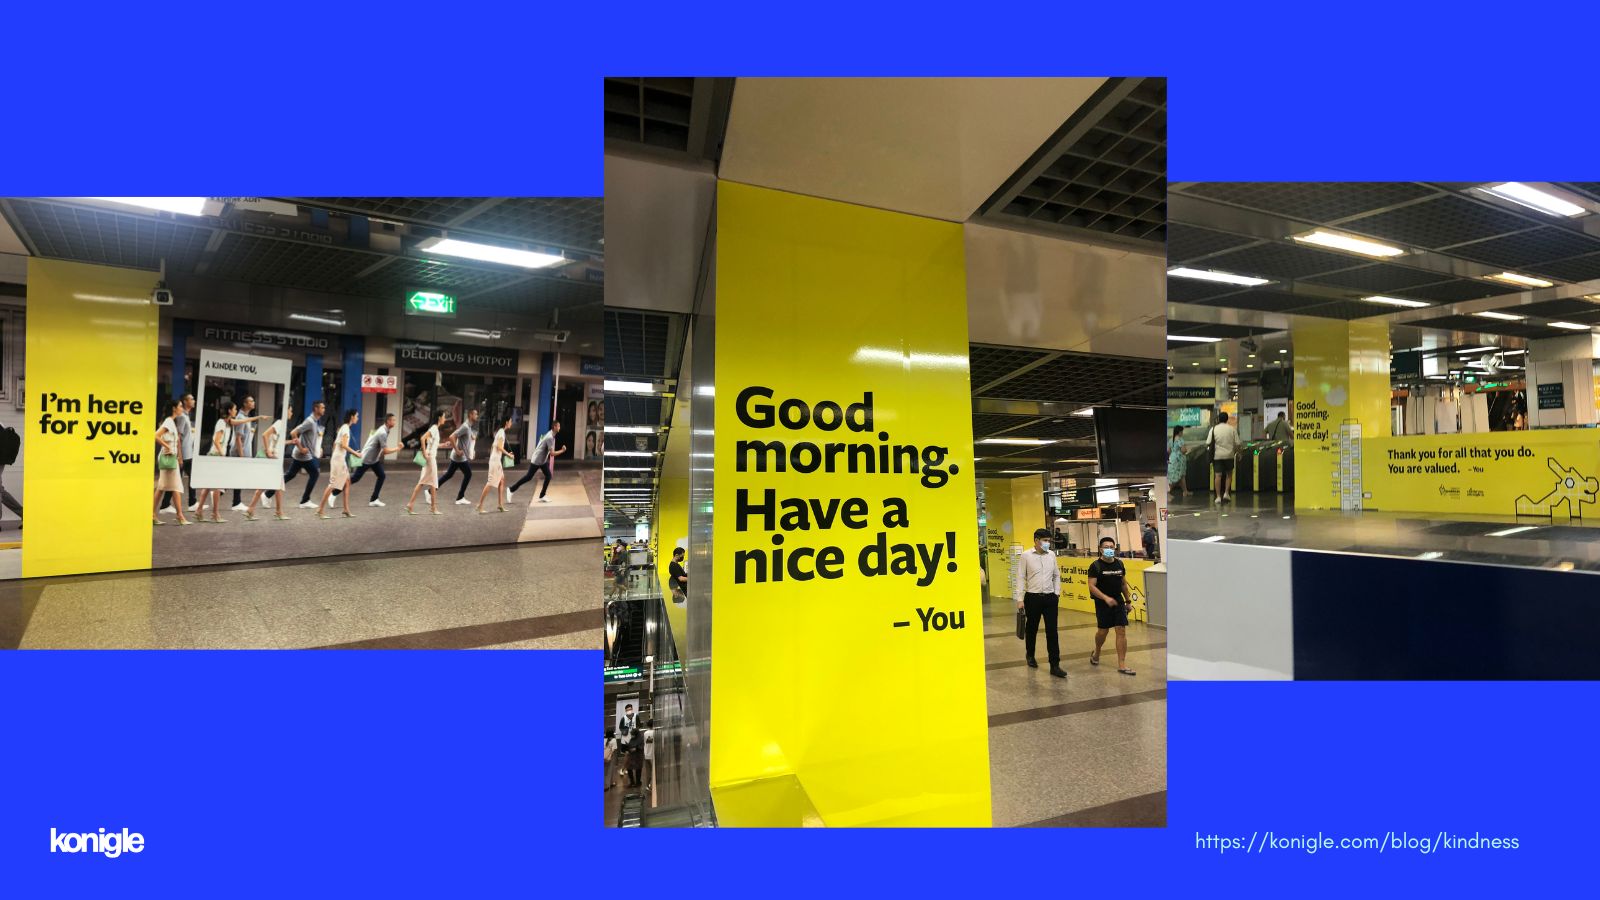 Bright yellow advertising by Singapore Kindness Movement to spread awareness at Citi Hall MRT station in Singapore